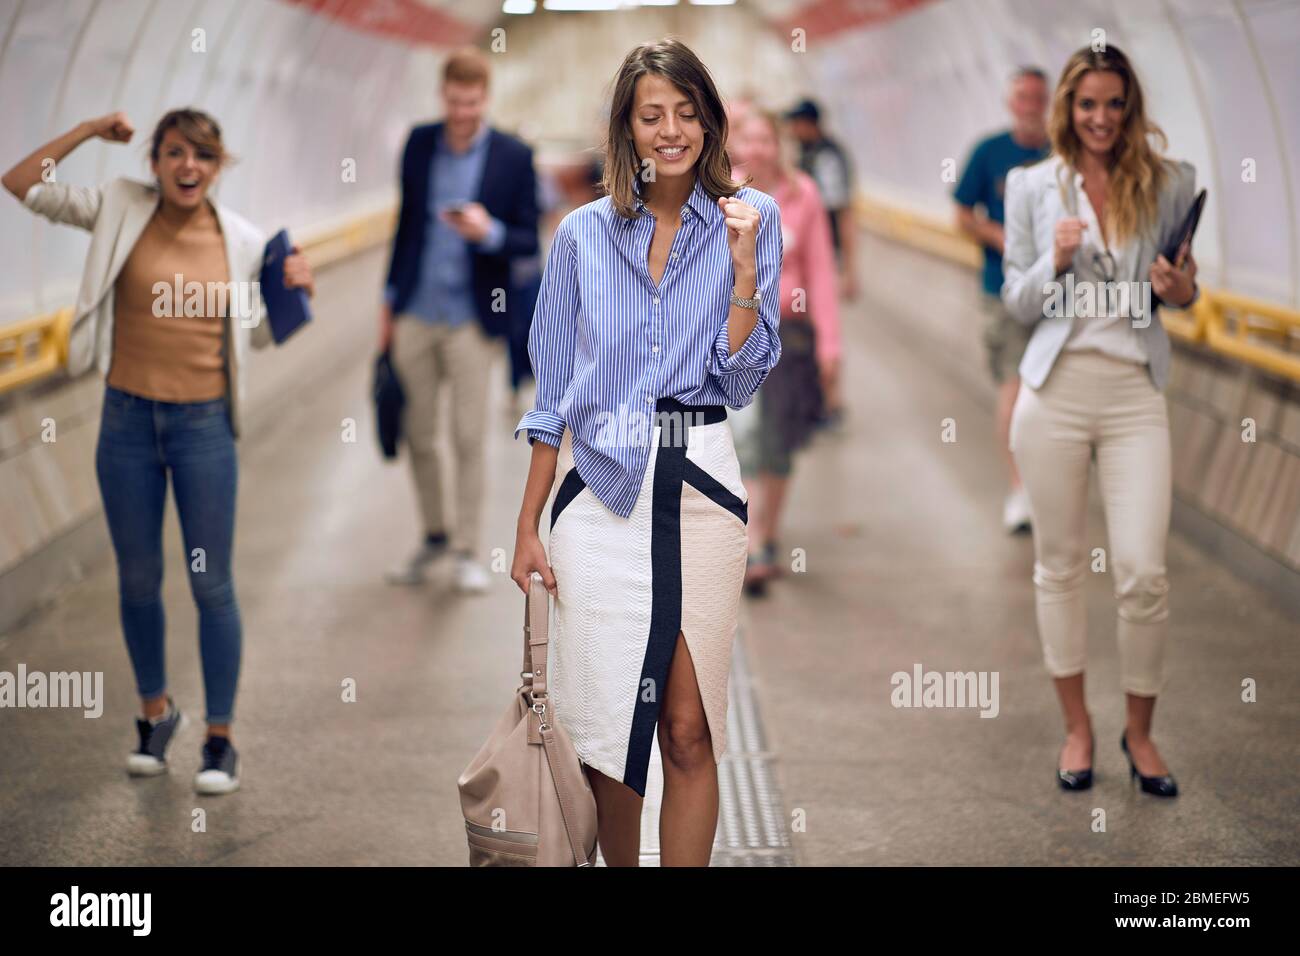 Successful business people In the subway station.Young Business People Walking Commuter Travel Motion City Concept Stock Photo